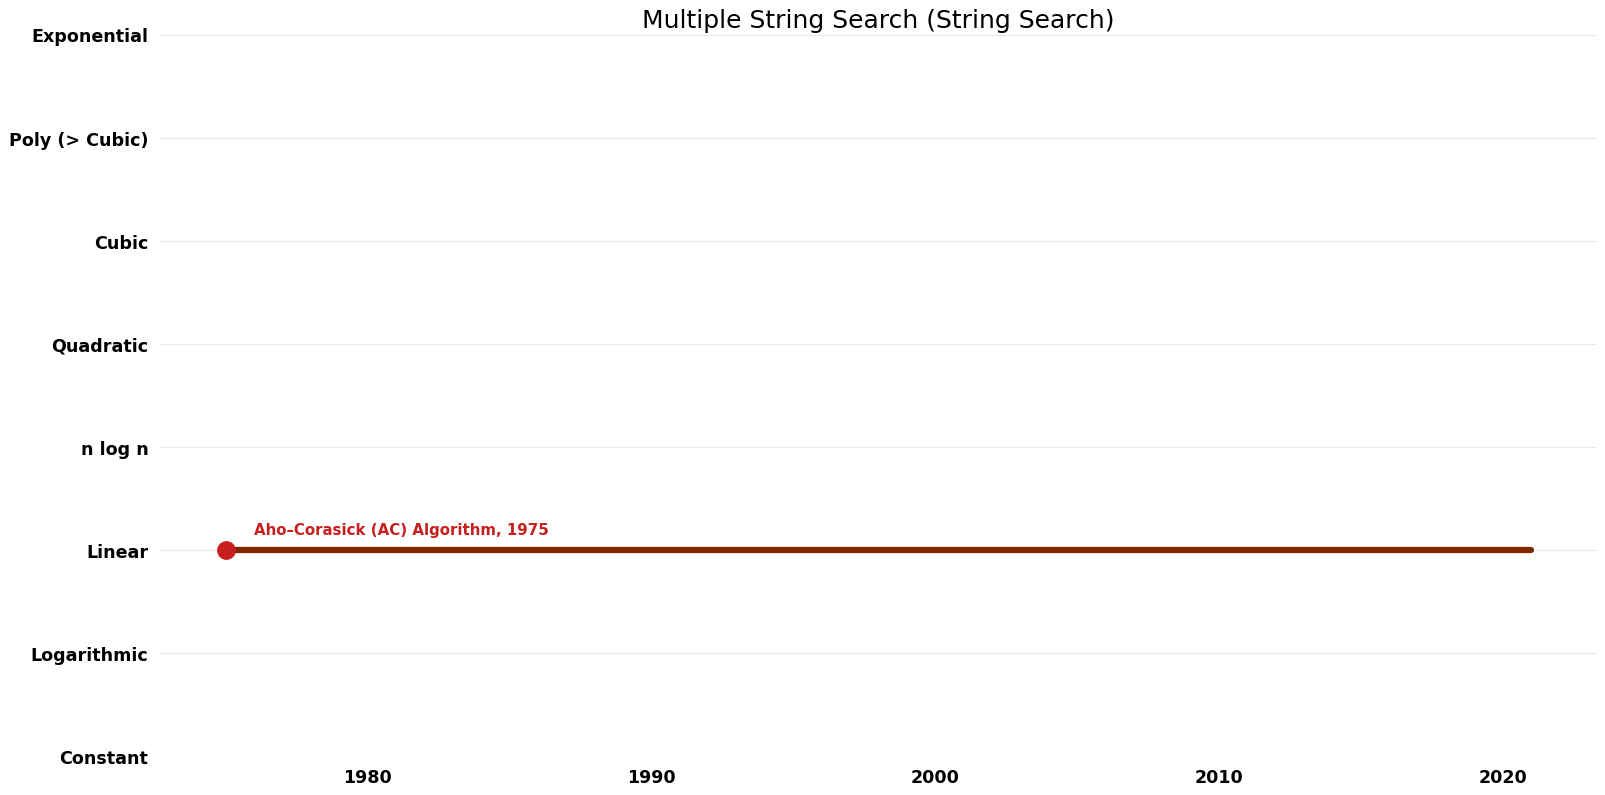 File:String Search - Multiple String Search - Time.png